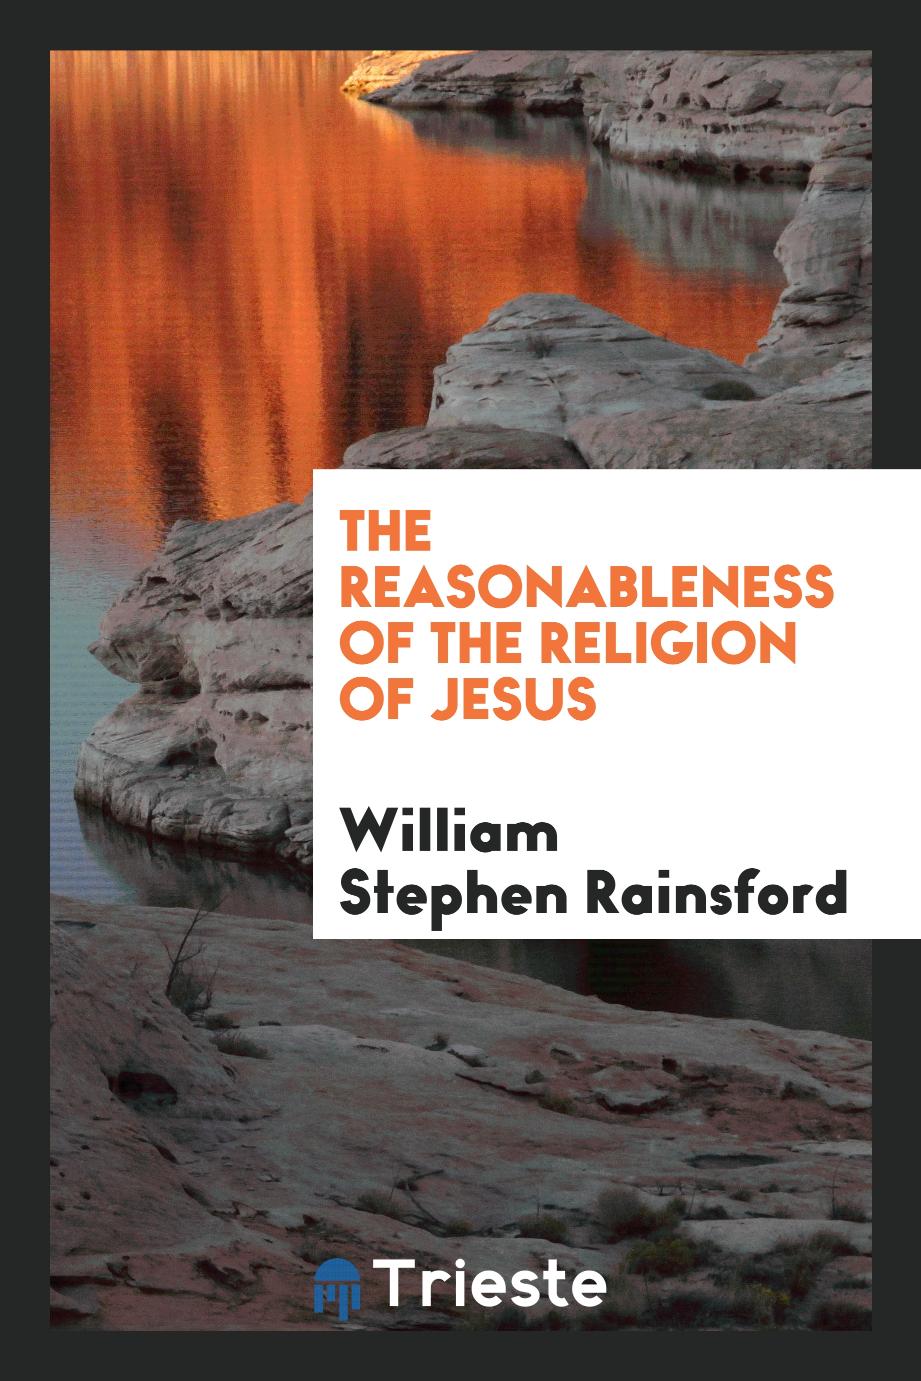 The reasonableness of the religion of Jesus